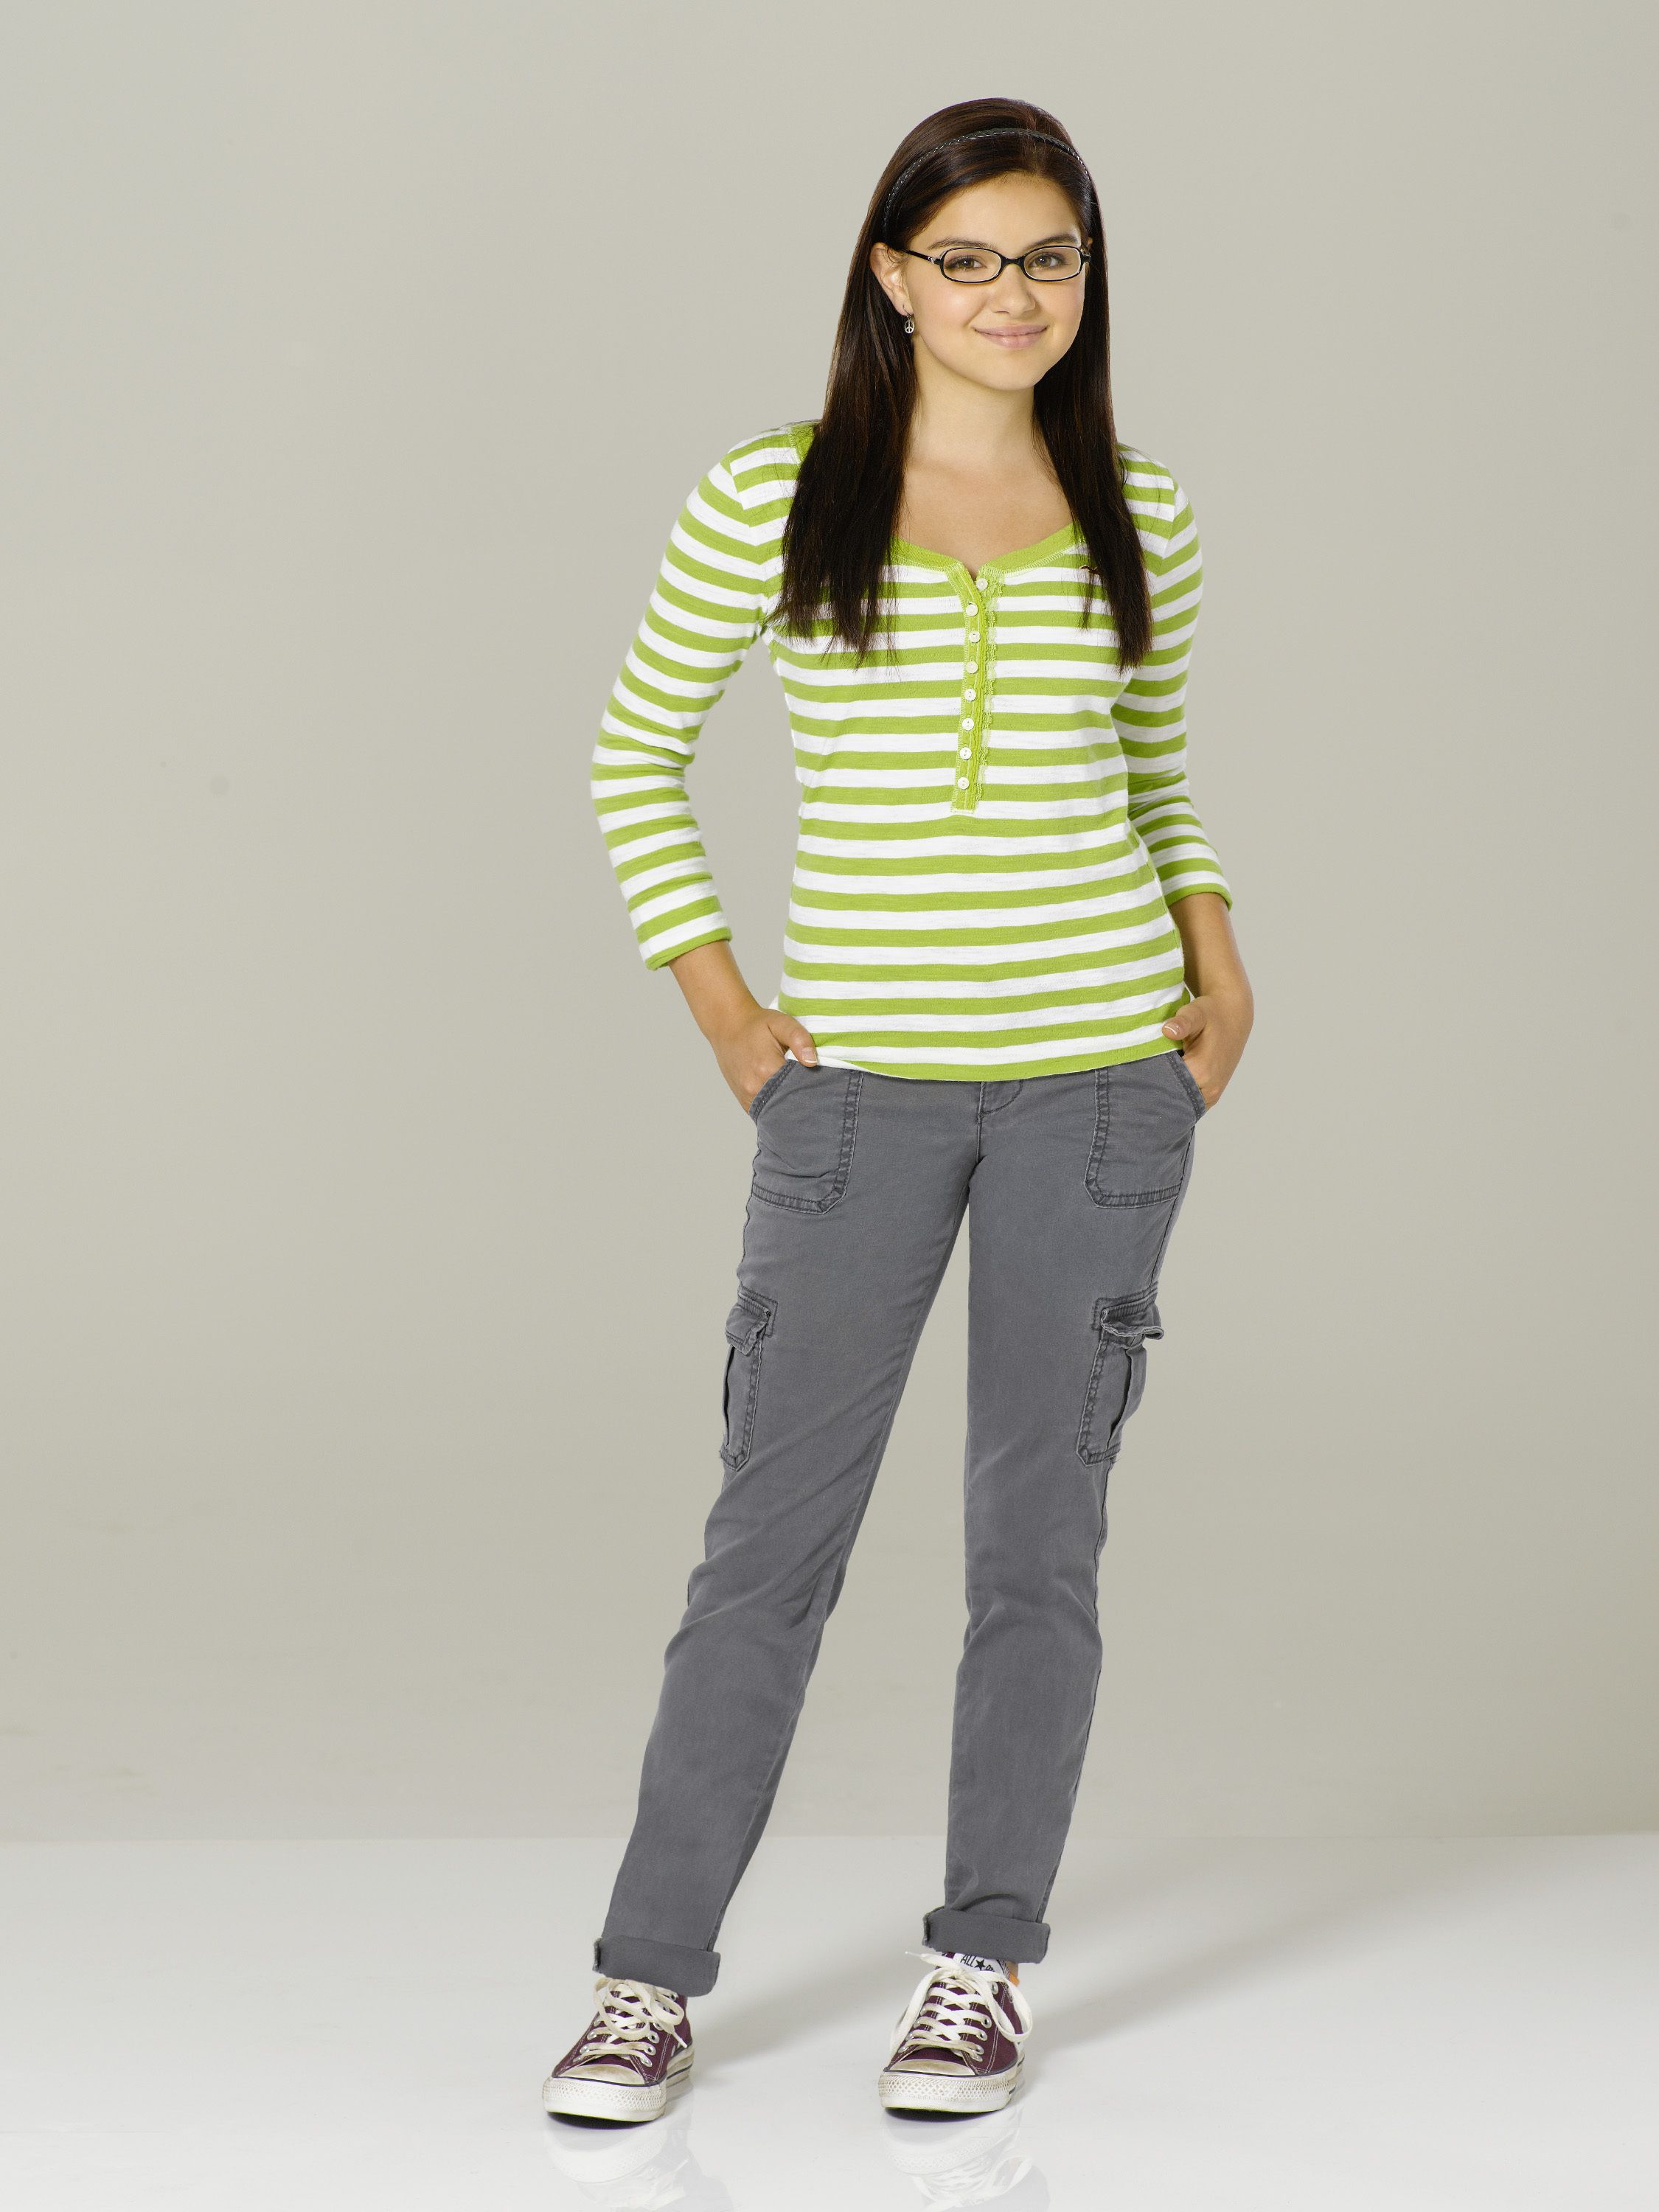 Ariel Winter as Alex Dunphy in #ModernFamily 3. Ariel winter modern family, Ariel winter, Ariel winter young